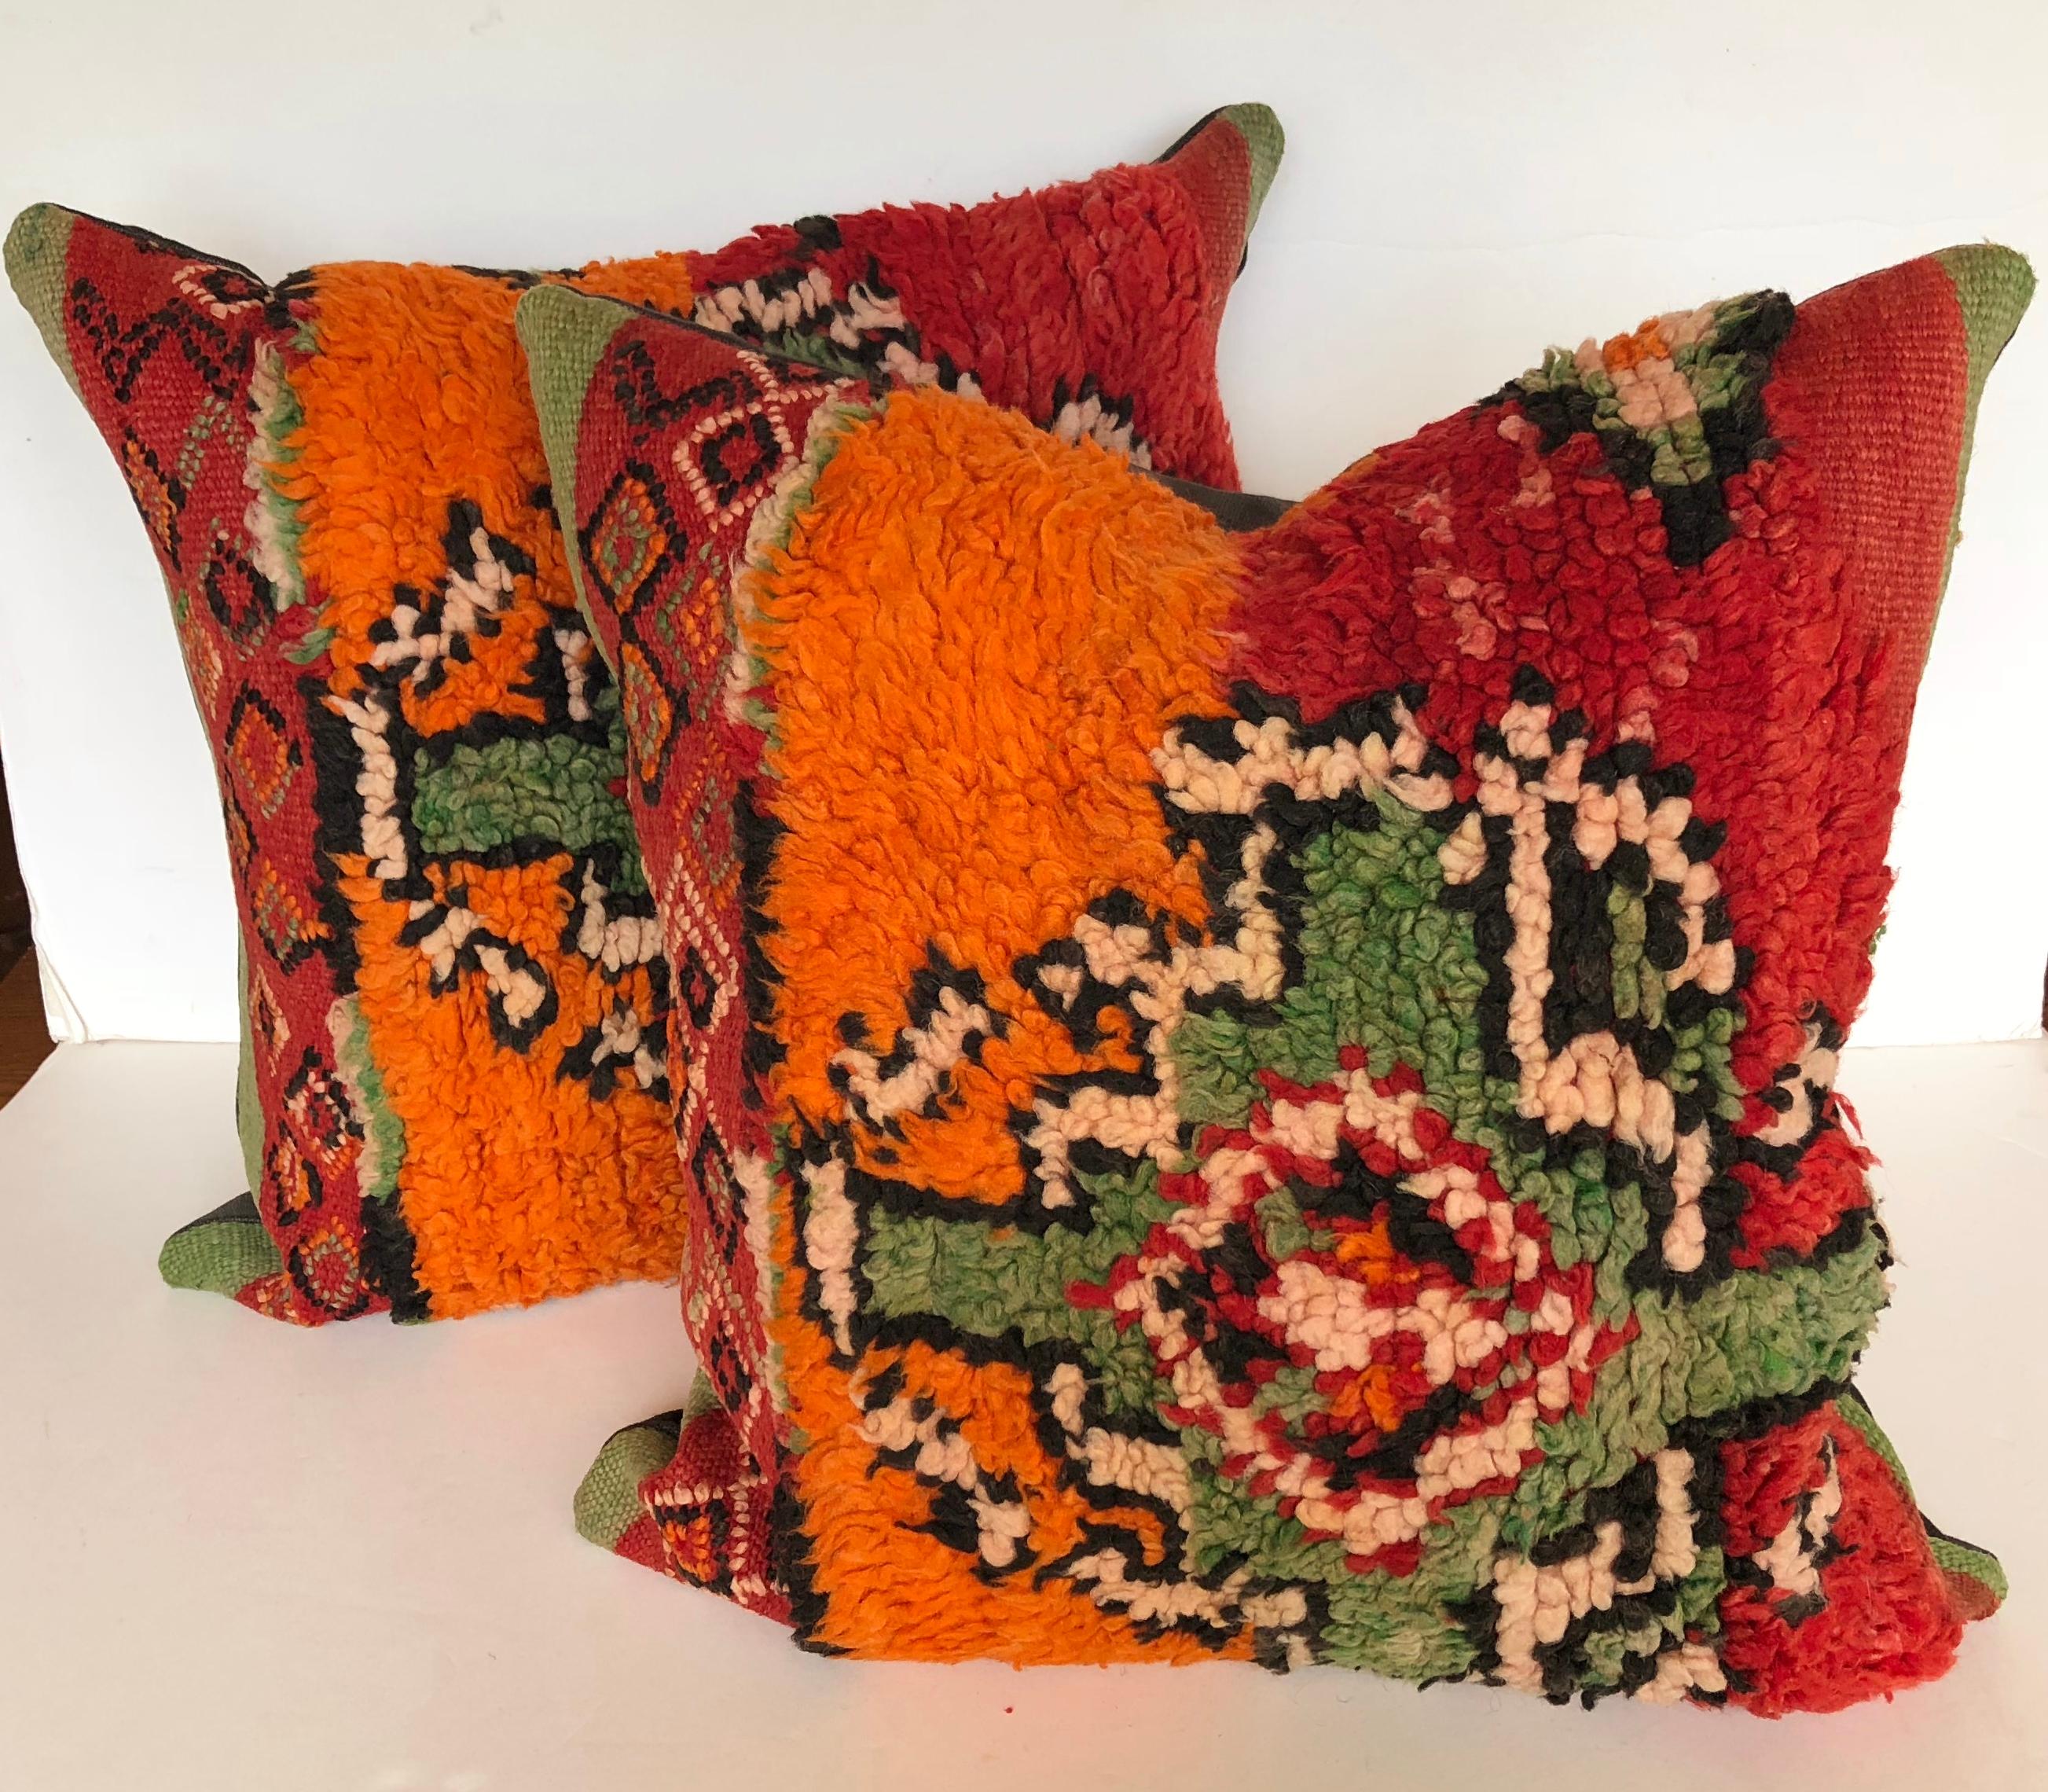 Custom pillows cut from a vintage hand loomed wool Ait Bou Ichaouen Moroccan Berber rug, one of the most remote, isolated tribes in Morocco. Bold striking colors and patterns reflect an older North African tradition unlike those from elsewhere.